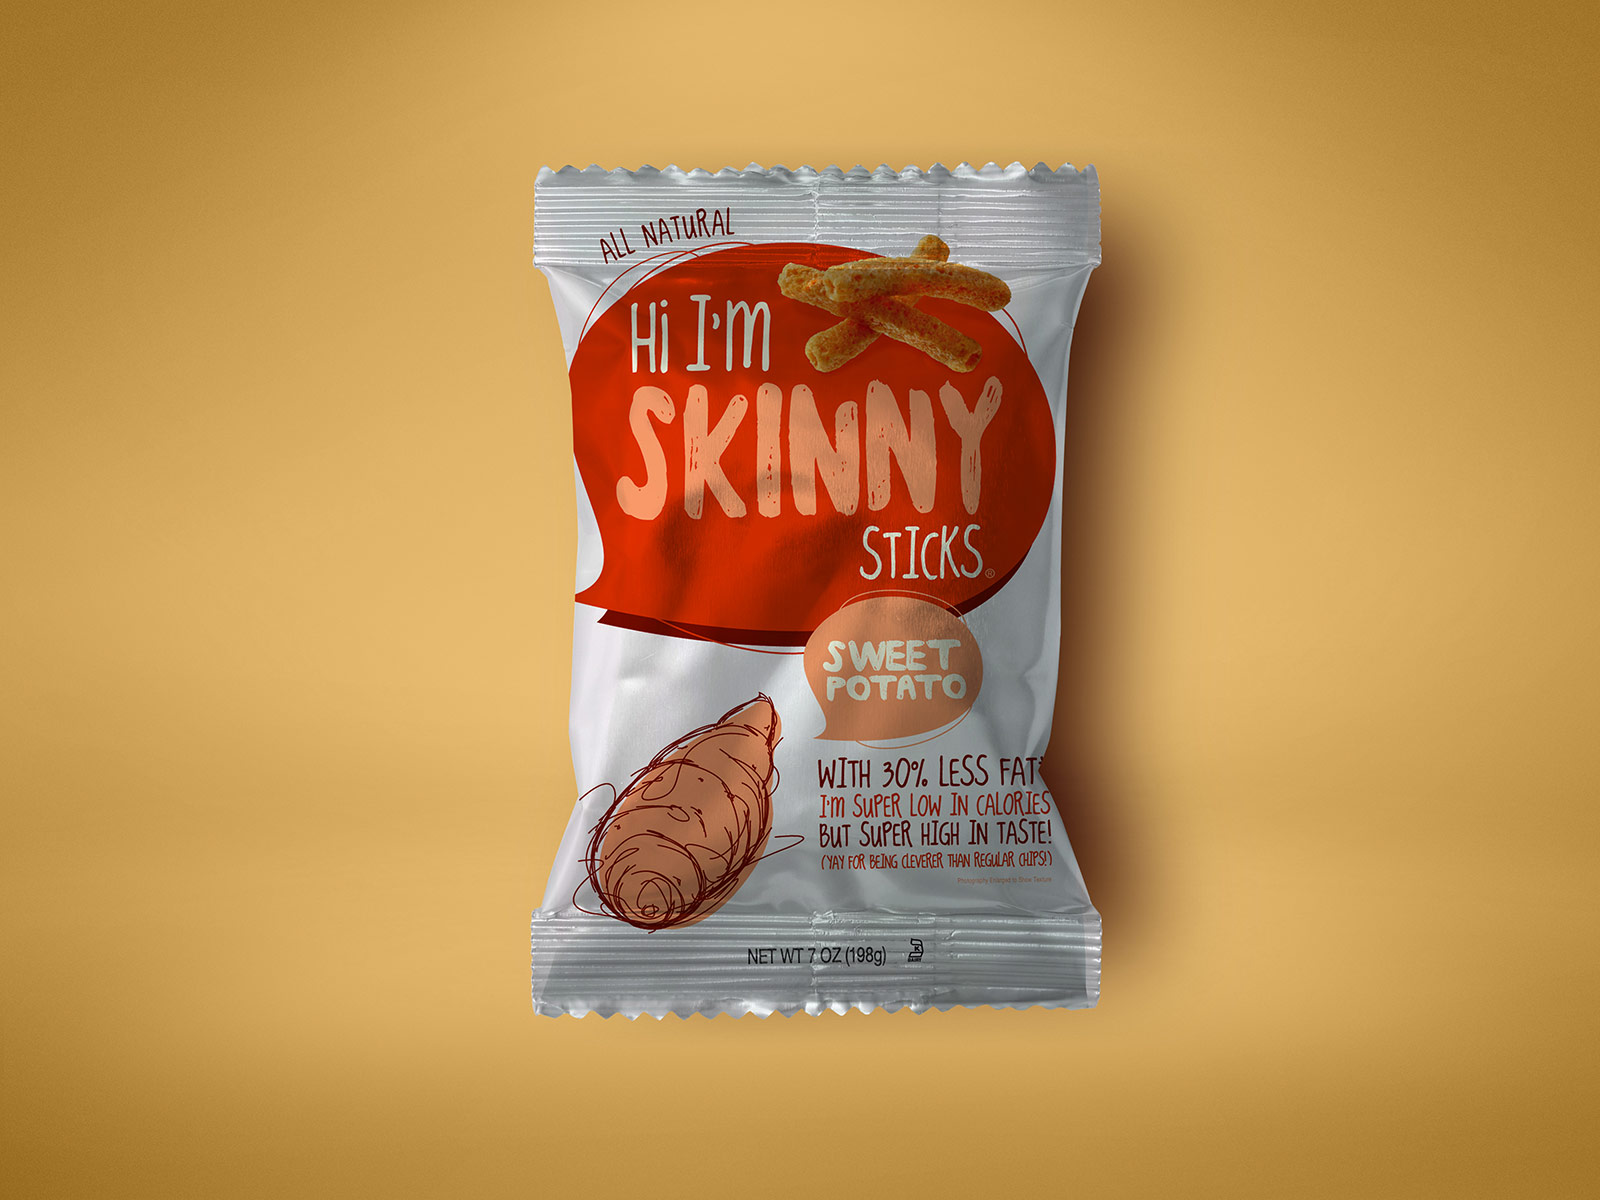 Free-Snack-Pack Aluminium-Pouch-Packaging Mockup-PSD